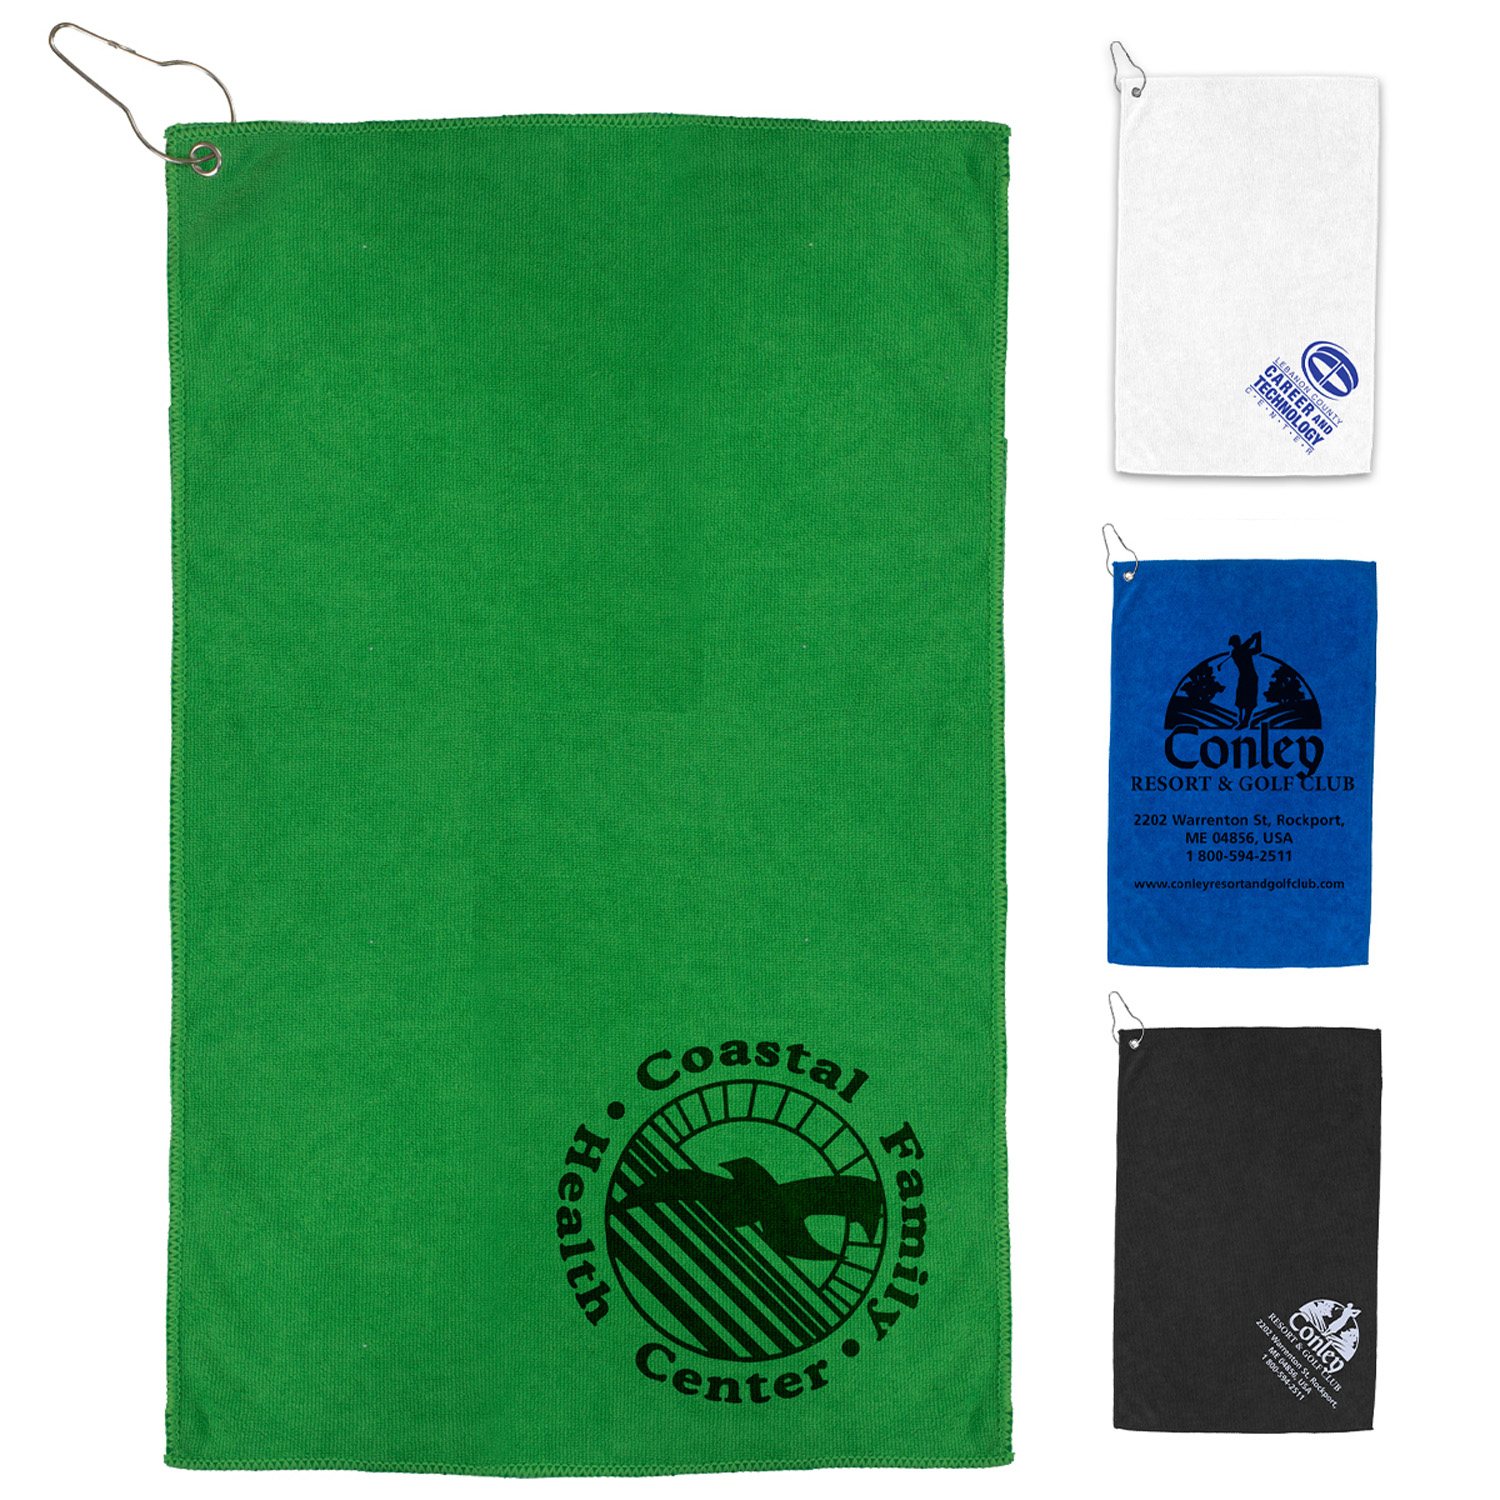 “The Iron” 300 GSM Heavy Duty Microfiber Golf Towel with Metal Grommet and Clip 12" x 18"